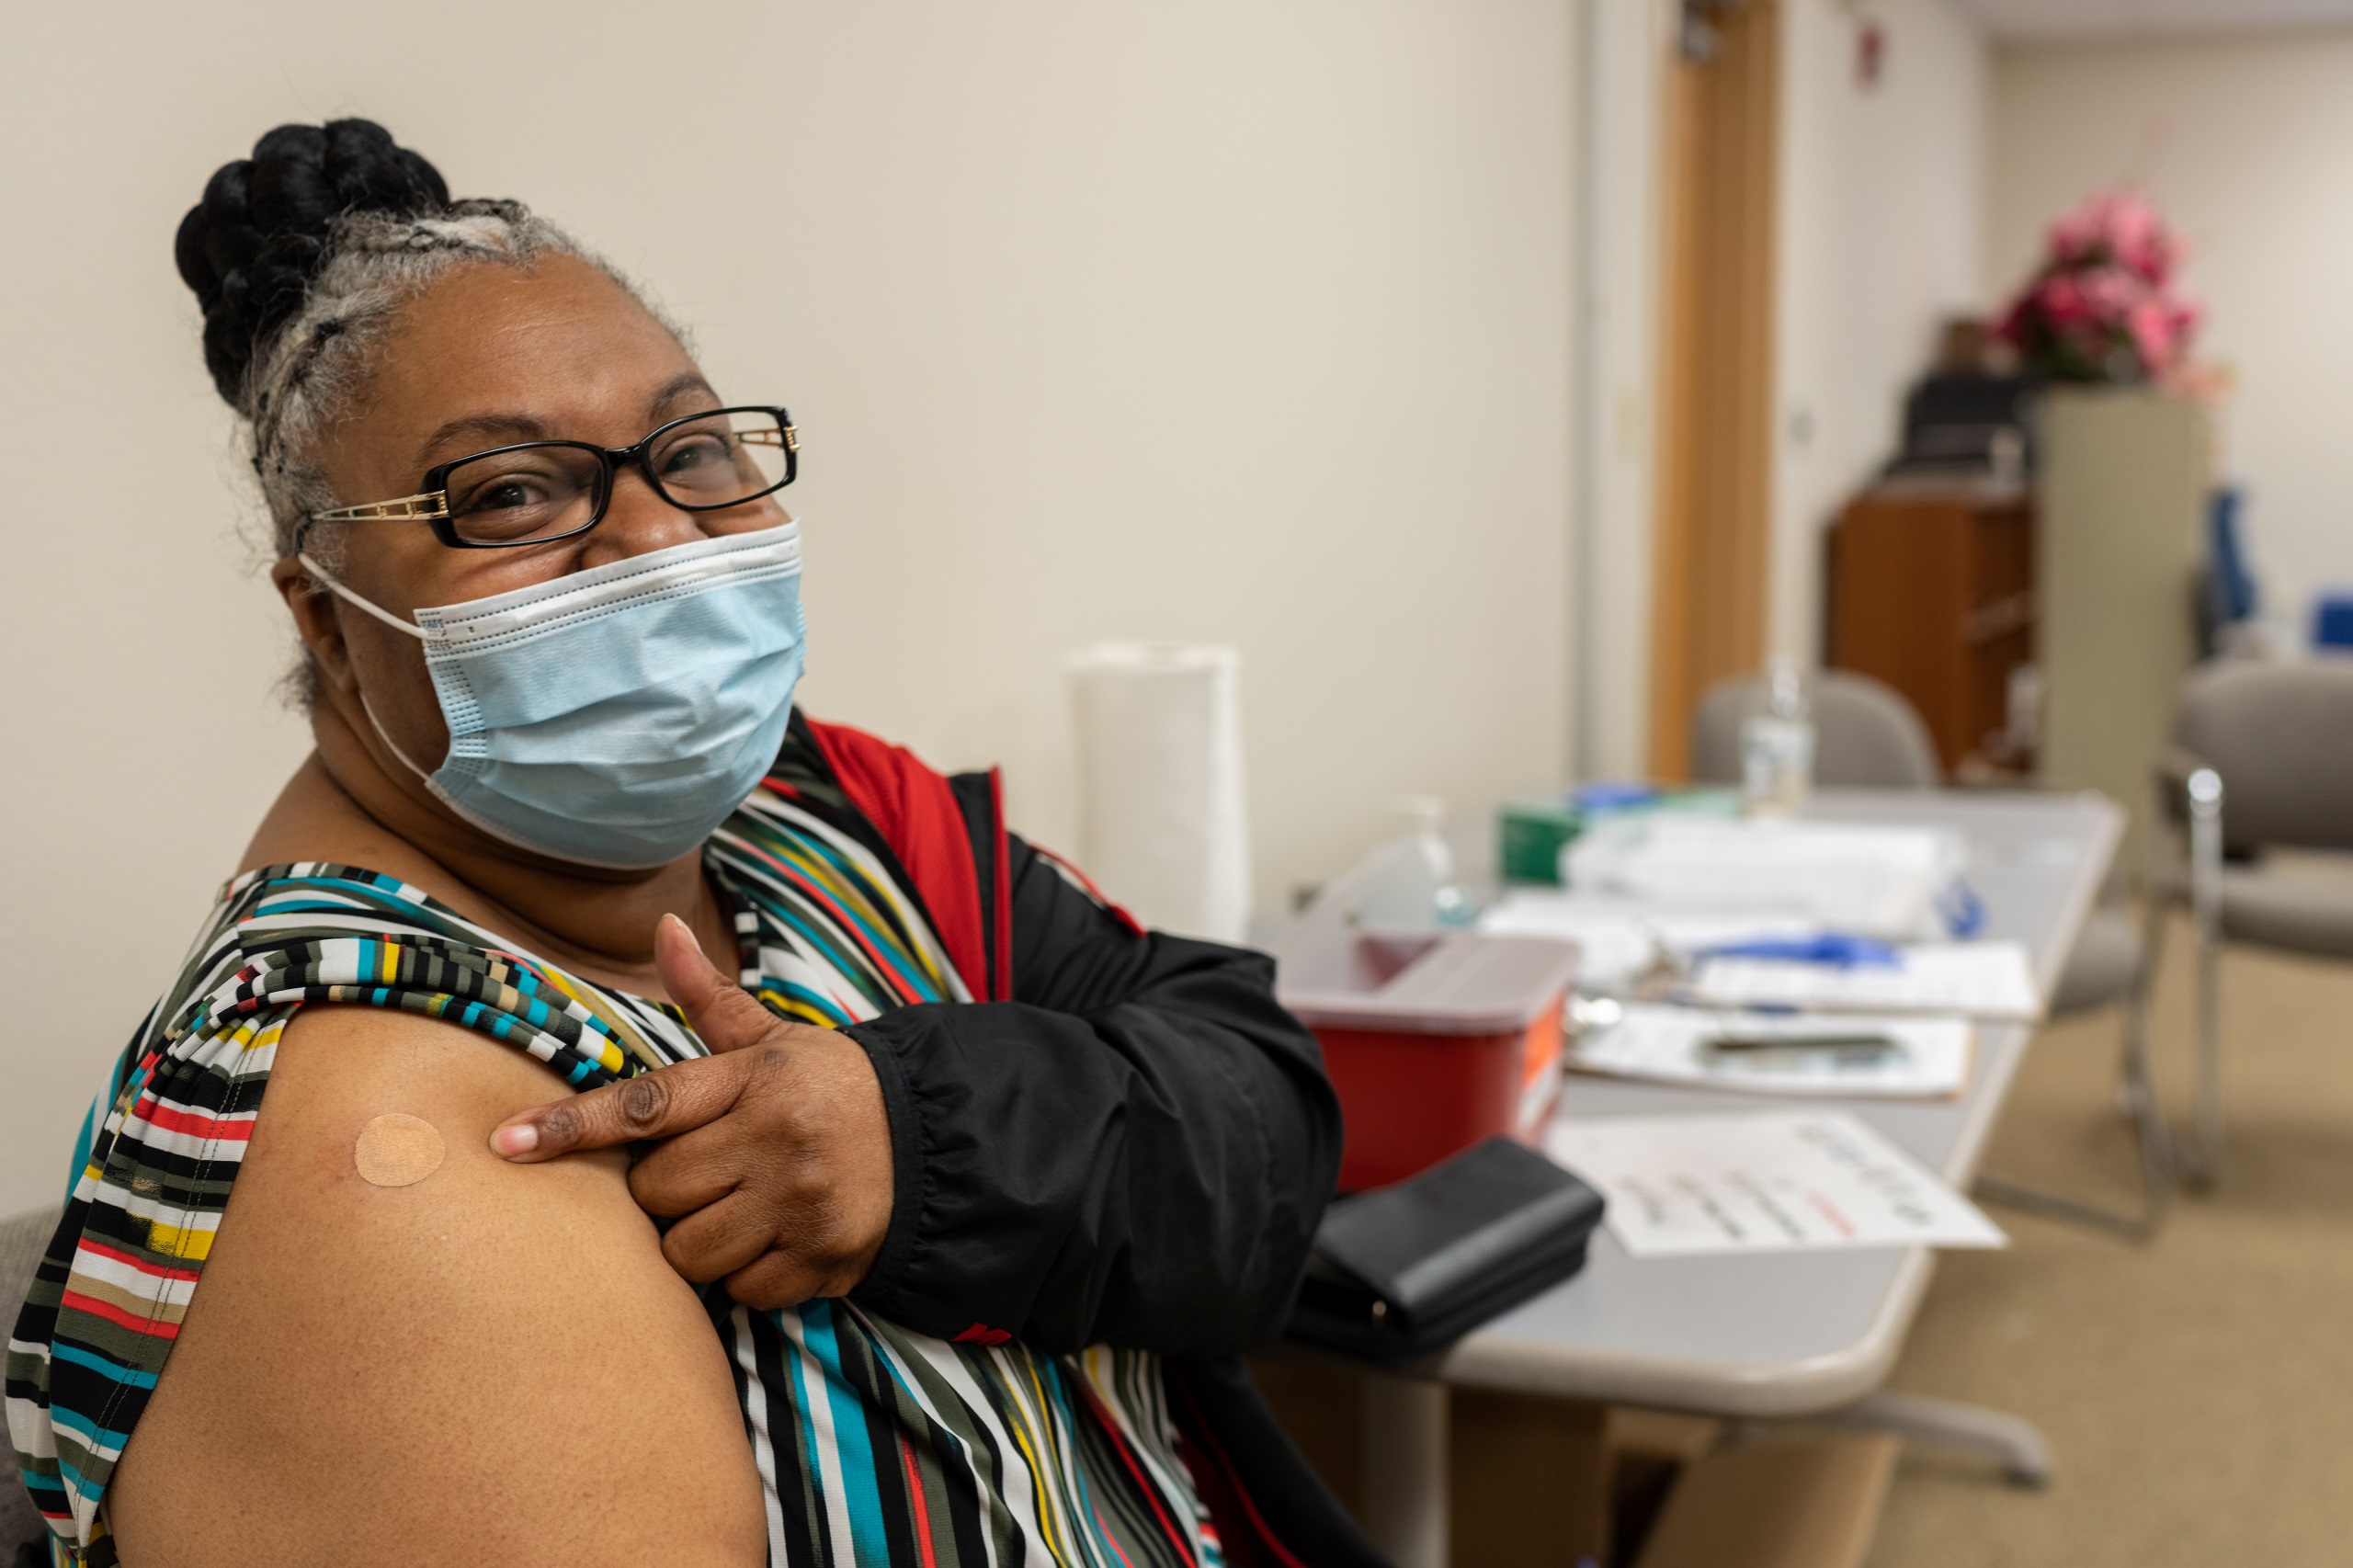 Image: Vera Montgomery was one of several hundred people who received a COVID-19 vaccination at the Mt. Moriah Missionary Baptist Church in Gainesville last Friday. The event was a collaboration between UF Health and the state Department of Health in Alachua County. (Photo by Jesse Jones)